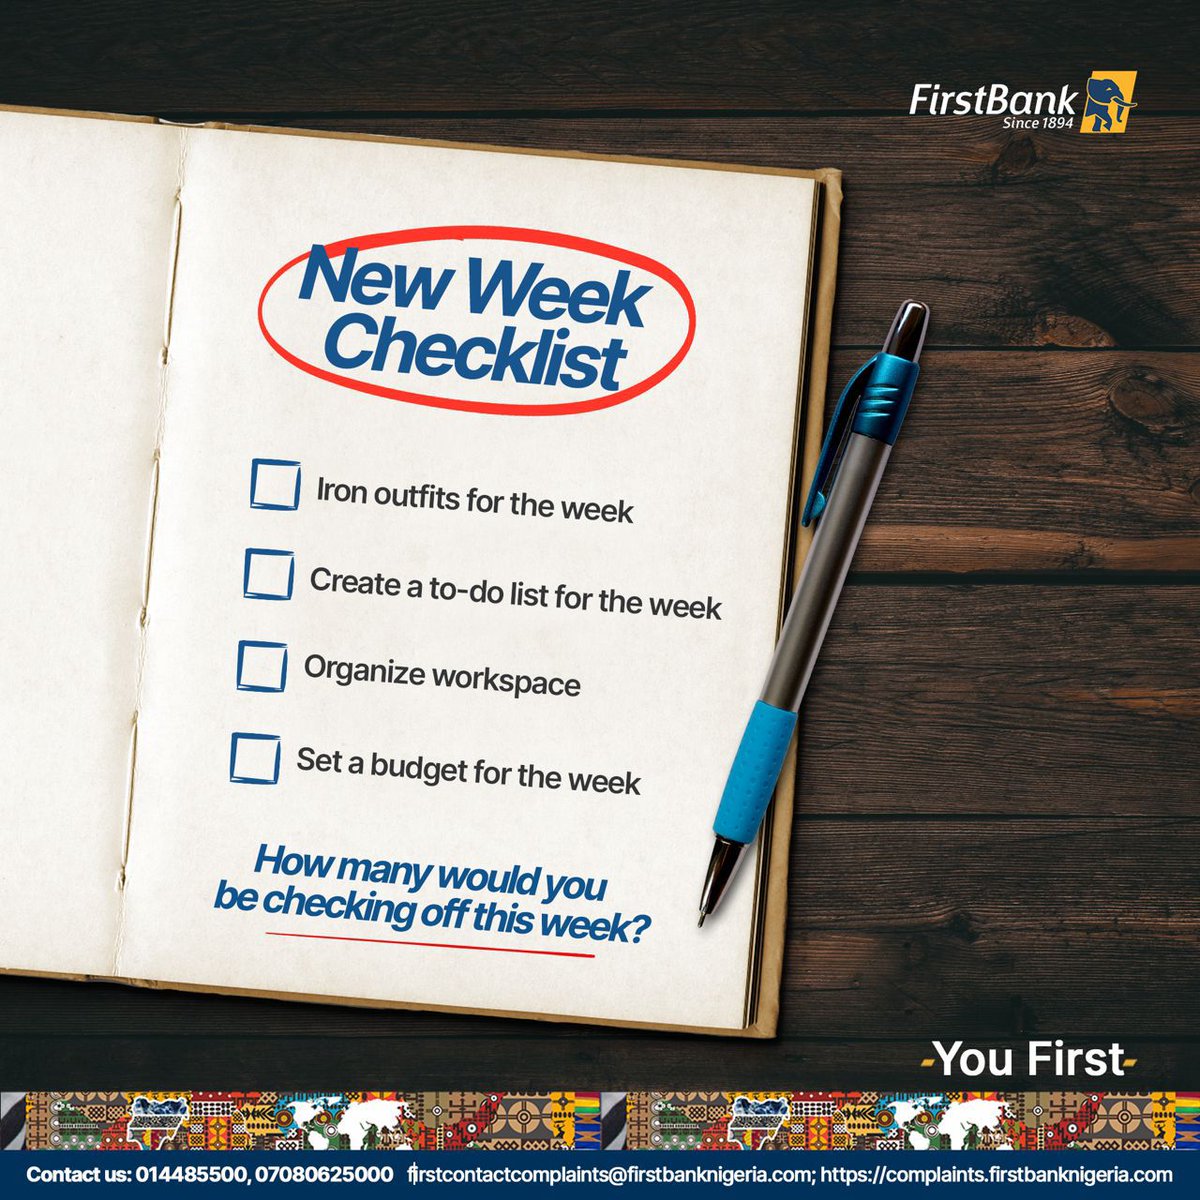 Have you created your new week checklist? 😉 Here’s a sign to do so if you haven’t. #YouFirst #FirstBank